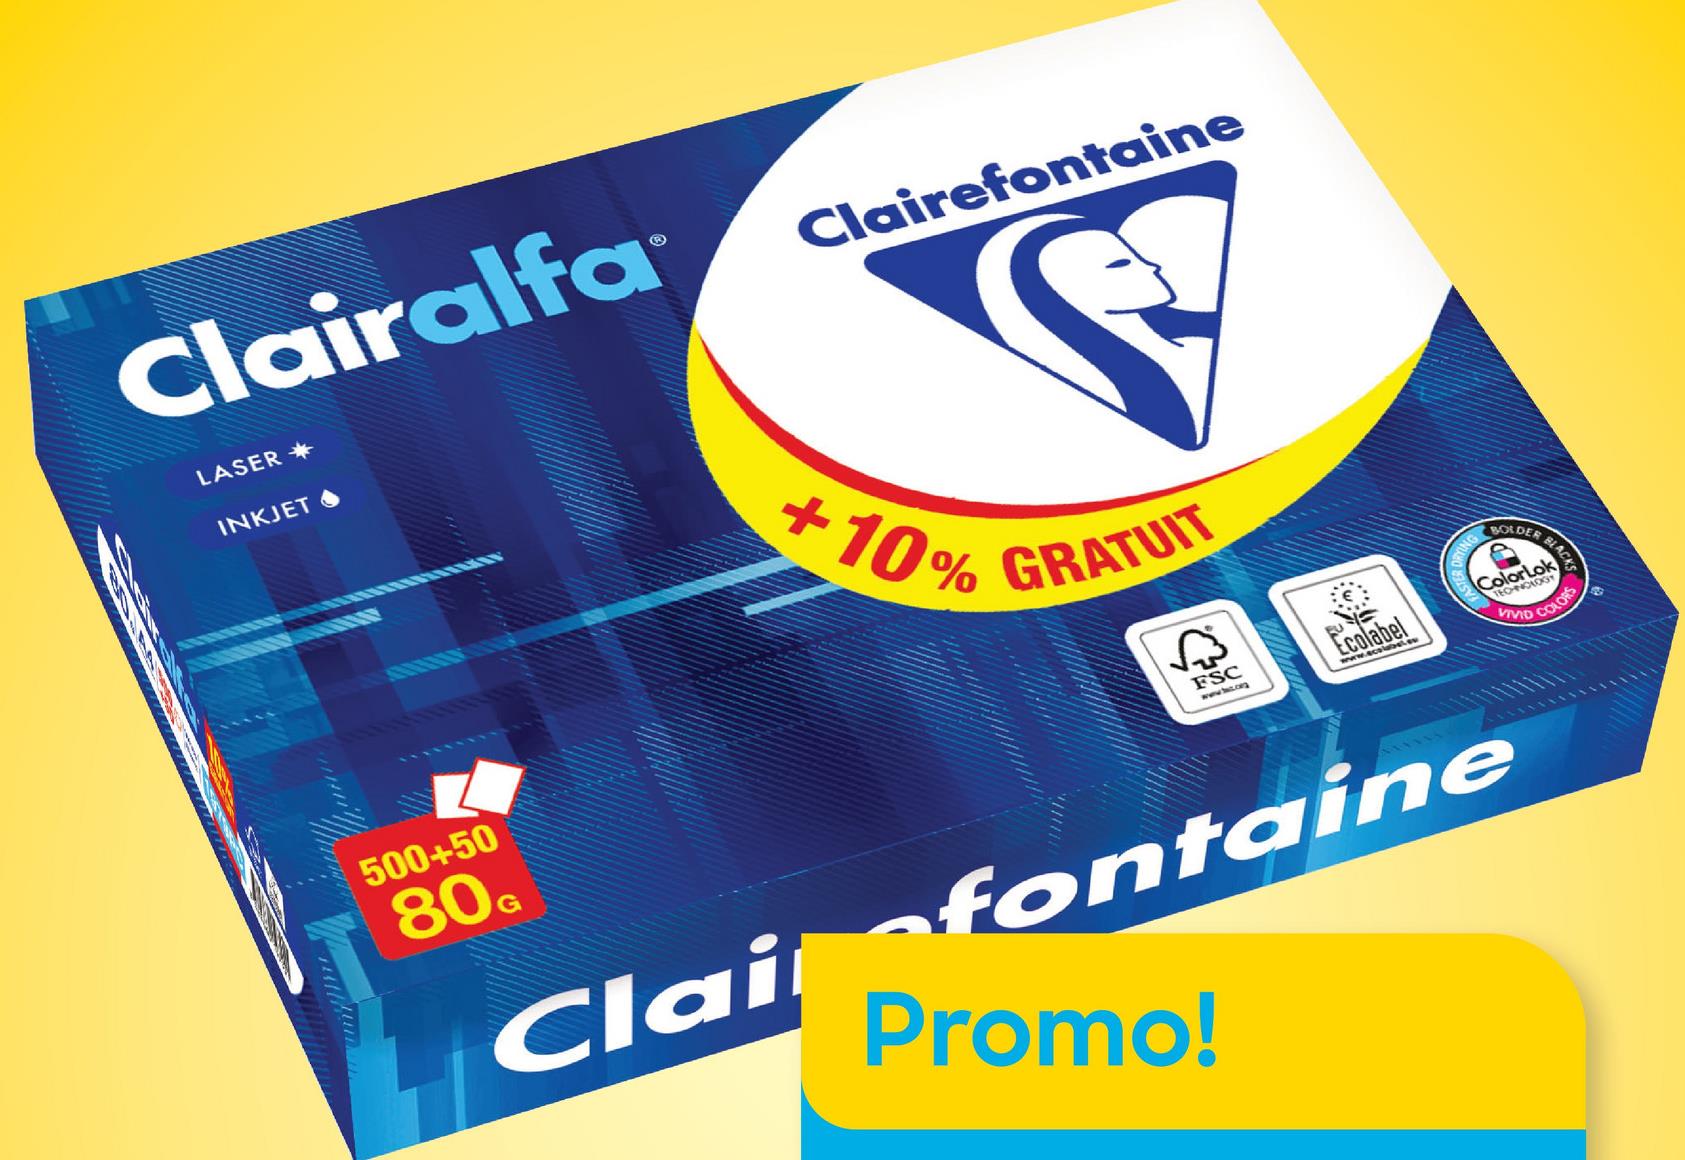 Clairalfa
LASER
INKJET
500+50
80G
Clairefontaine
+10% GRATUIT
FSC
www.bc.org
Ecolabel
ING
S
ColorLok
TECHNOLOGY
VIVID
BLACKS
BLACKS
Clairefontaine
Promo!
COLORS